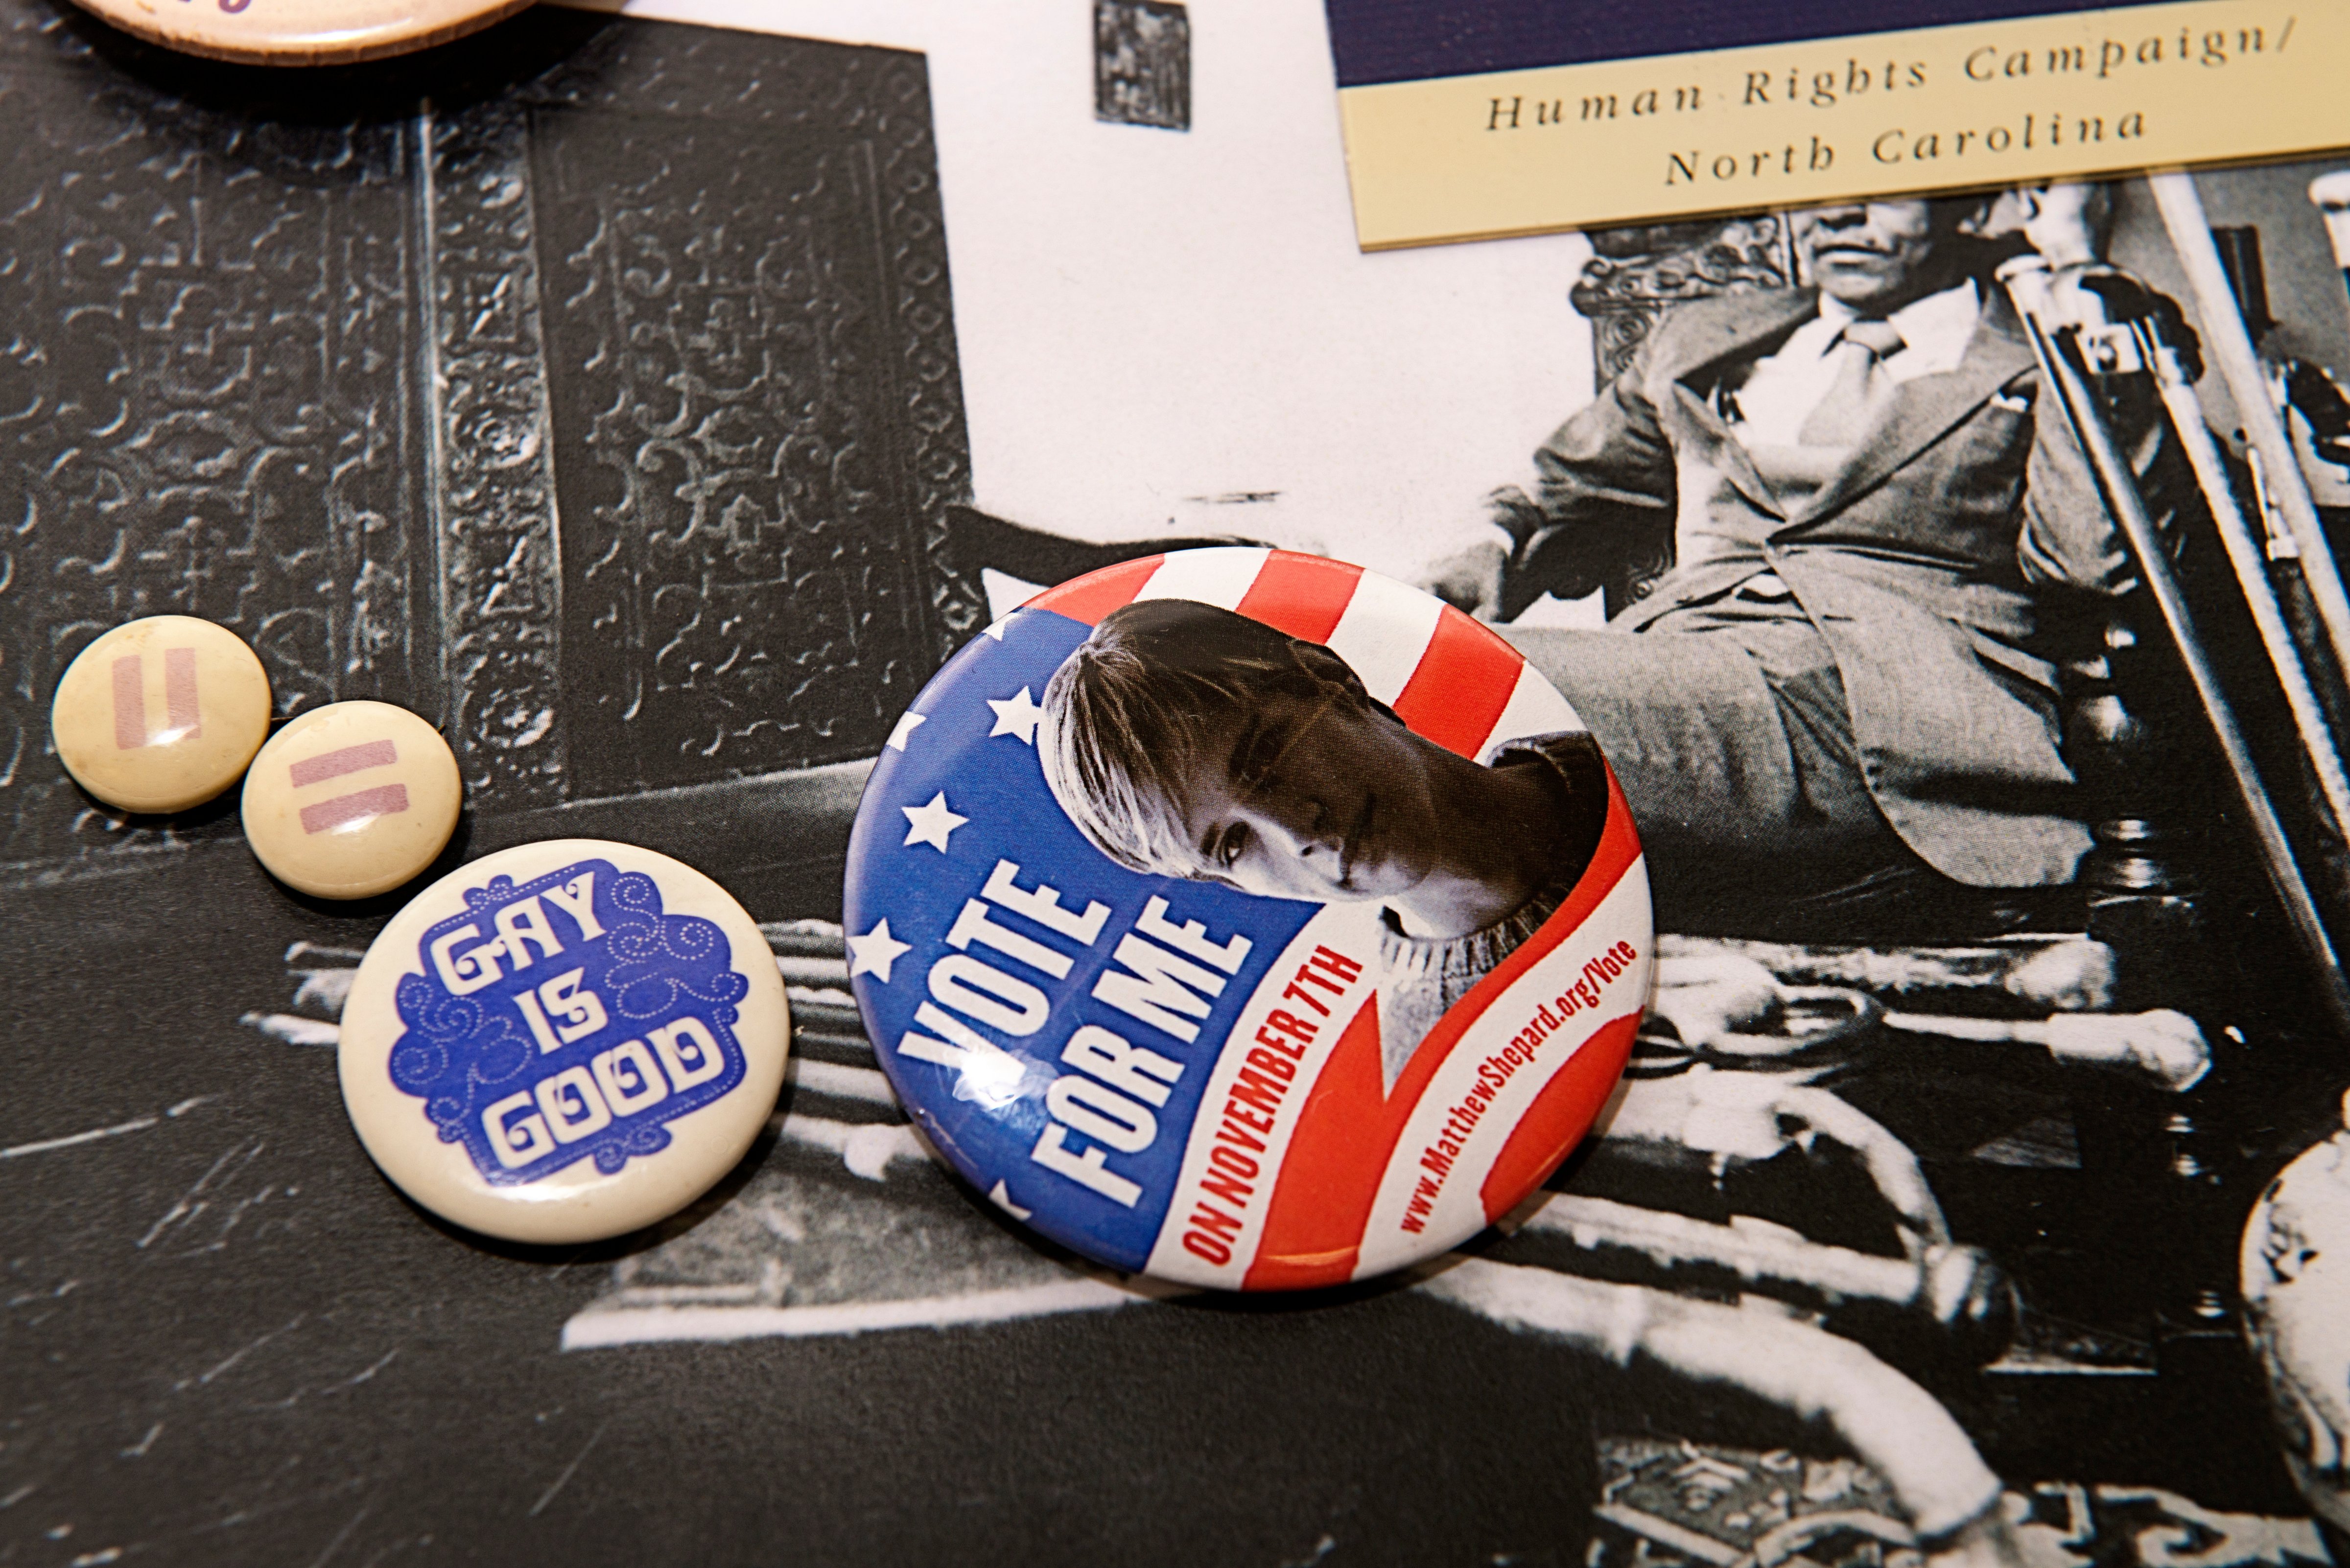 Buttons for voters who support LGBTQ rights, including one with a picture of the late Matthew Shepard, likely from the 1998 election. (Marvin Joseph—The Washington Post via Getty Images)